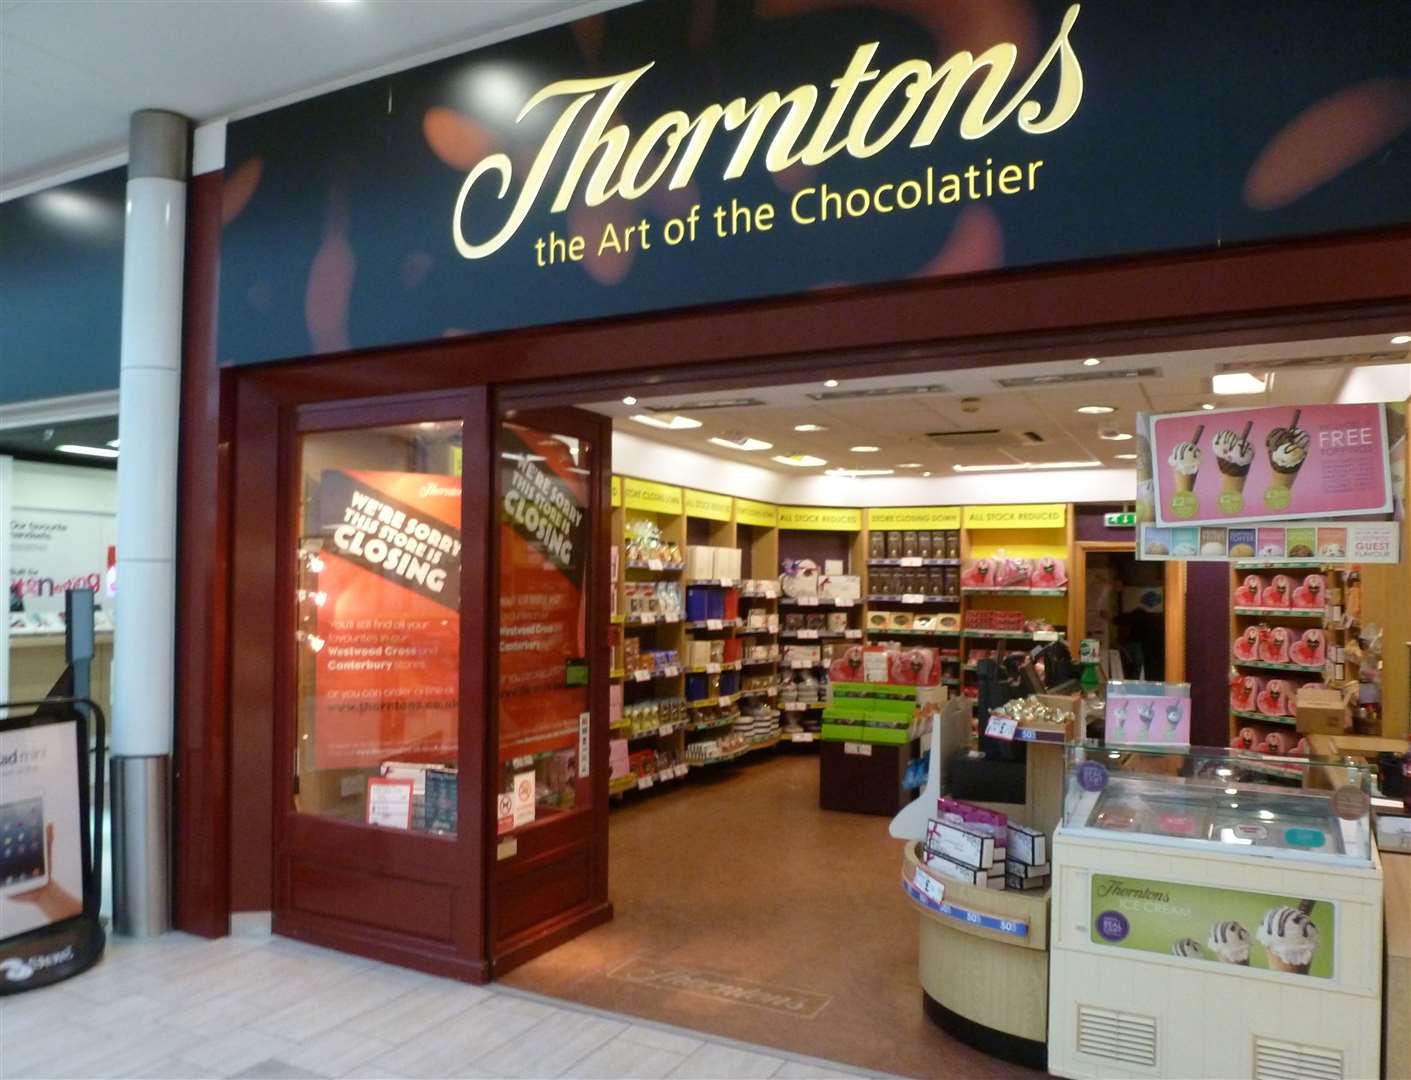 Thorntons left County Square in 2013